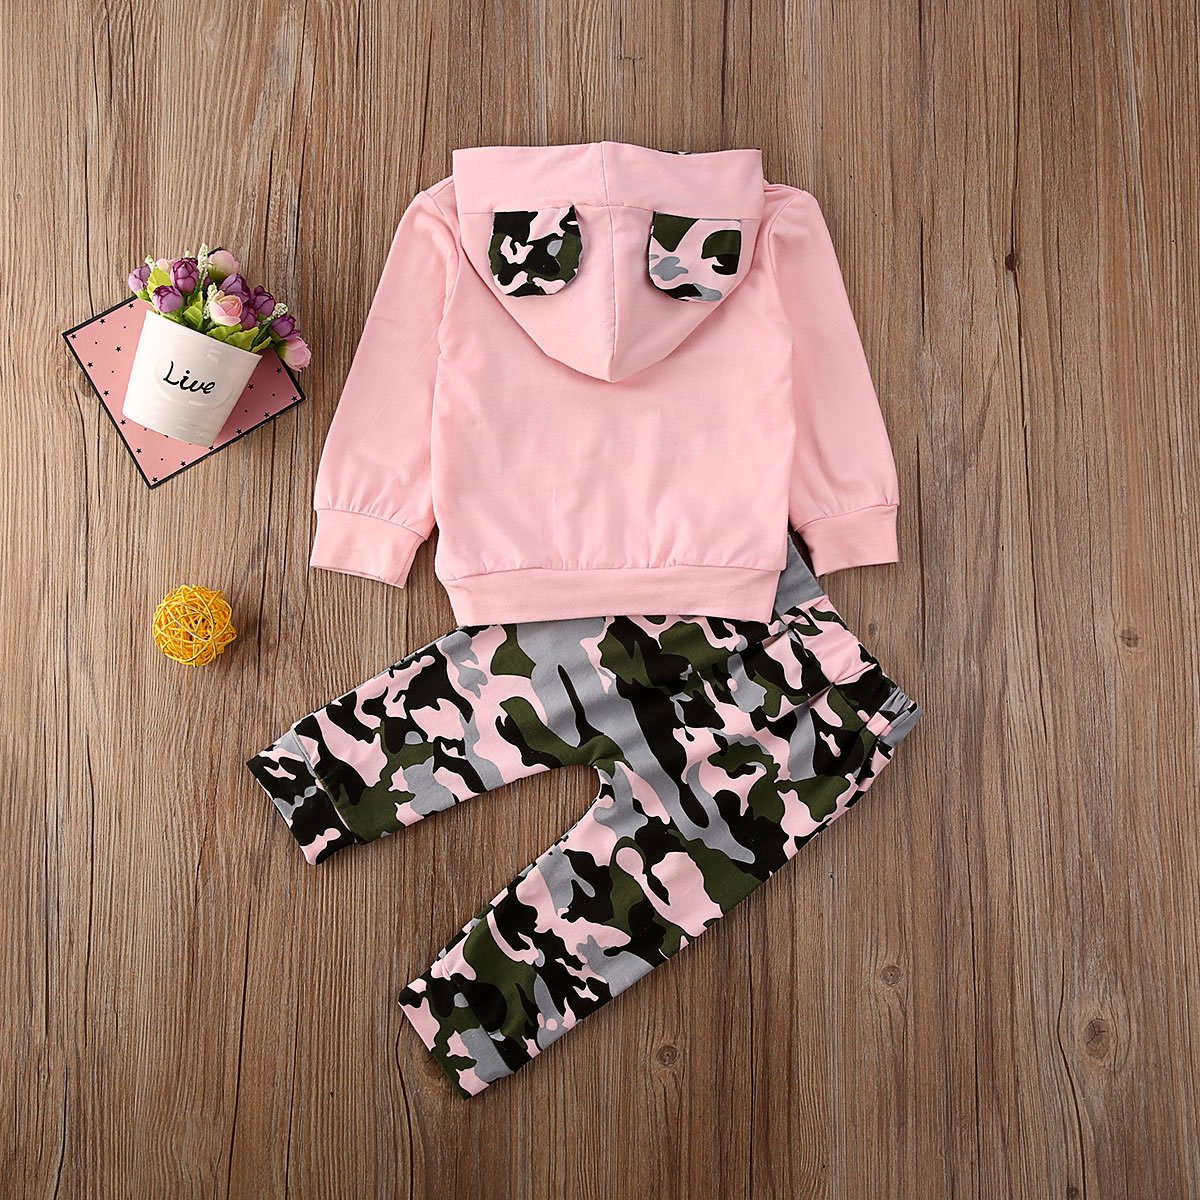 Baby Clothes - Cute Hooded Clothes Set